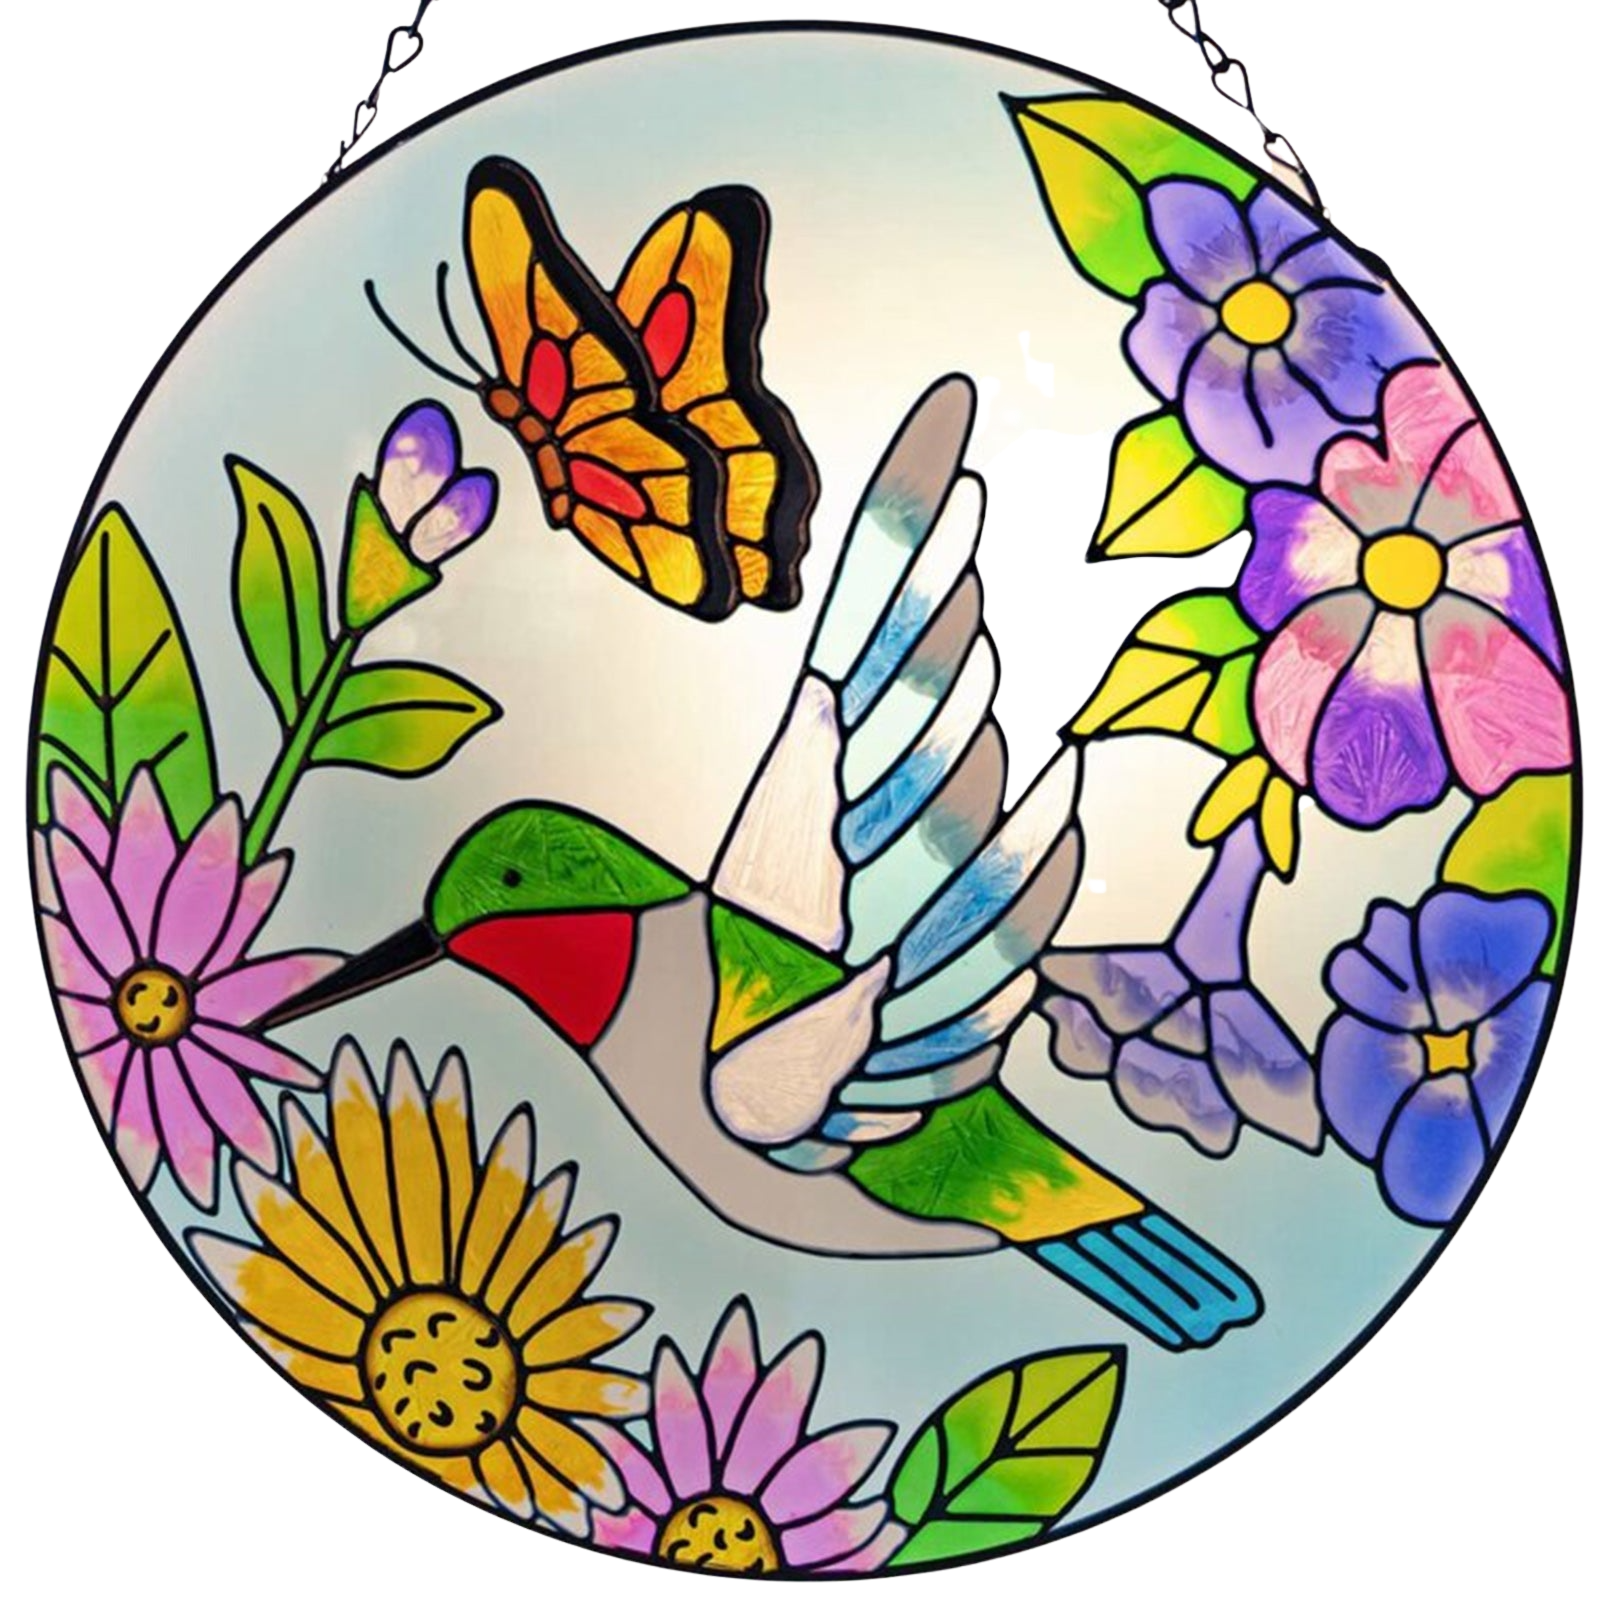 Hummingbird Stained Glass Window Hangings Stain Glass Window Hangings Bird Suncatchers Bird Suncatchers Panel Home Decor With - Home Decor Gifts and More